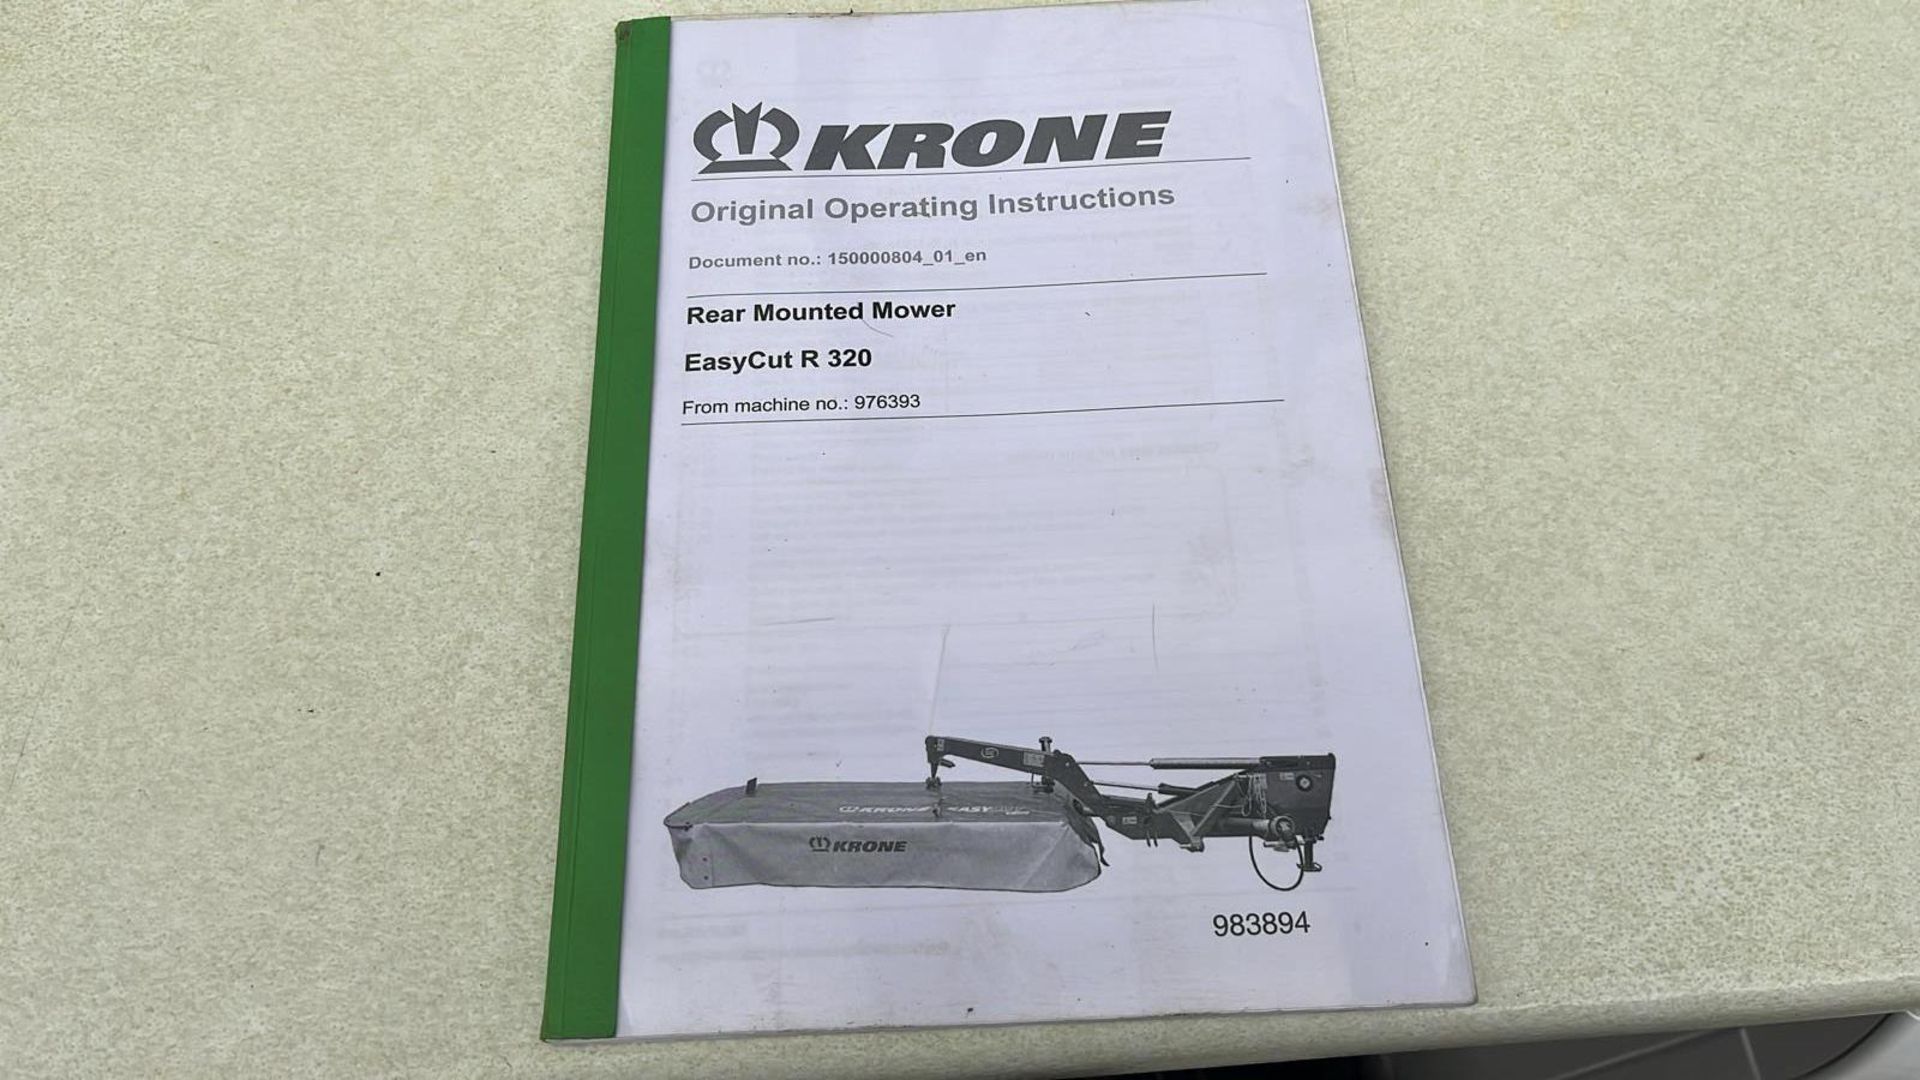 2018 KRONE EASY CUT R320 REAR MOUNTED MOWER WITH OPERATING MANUAL + VAT - Image 20 of 23